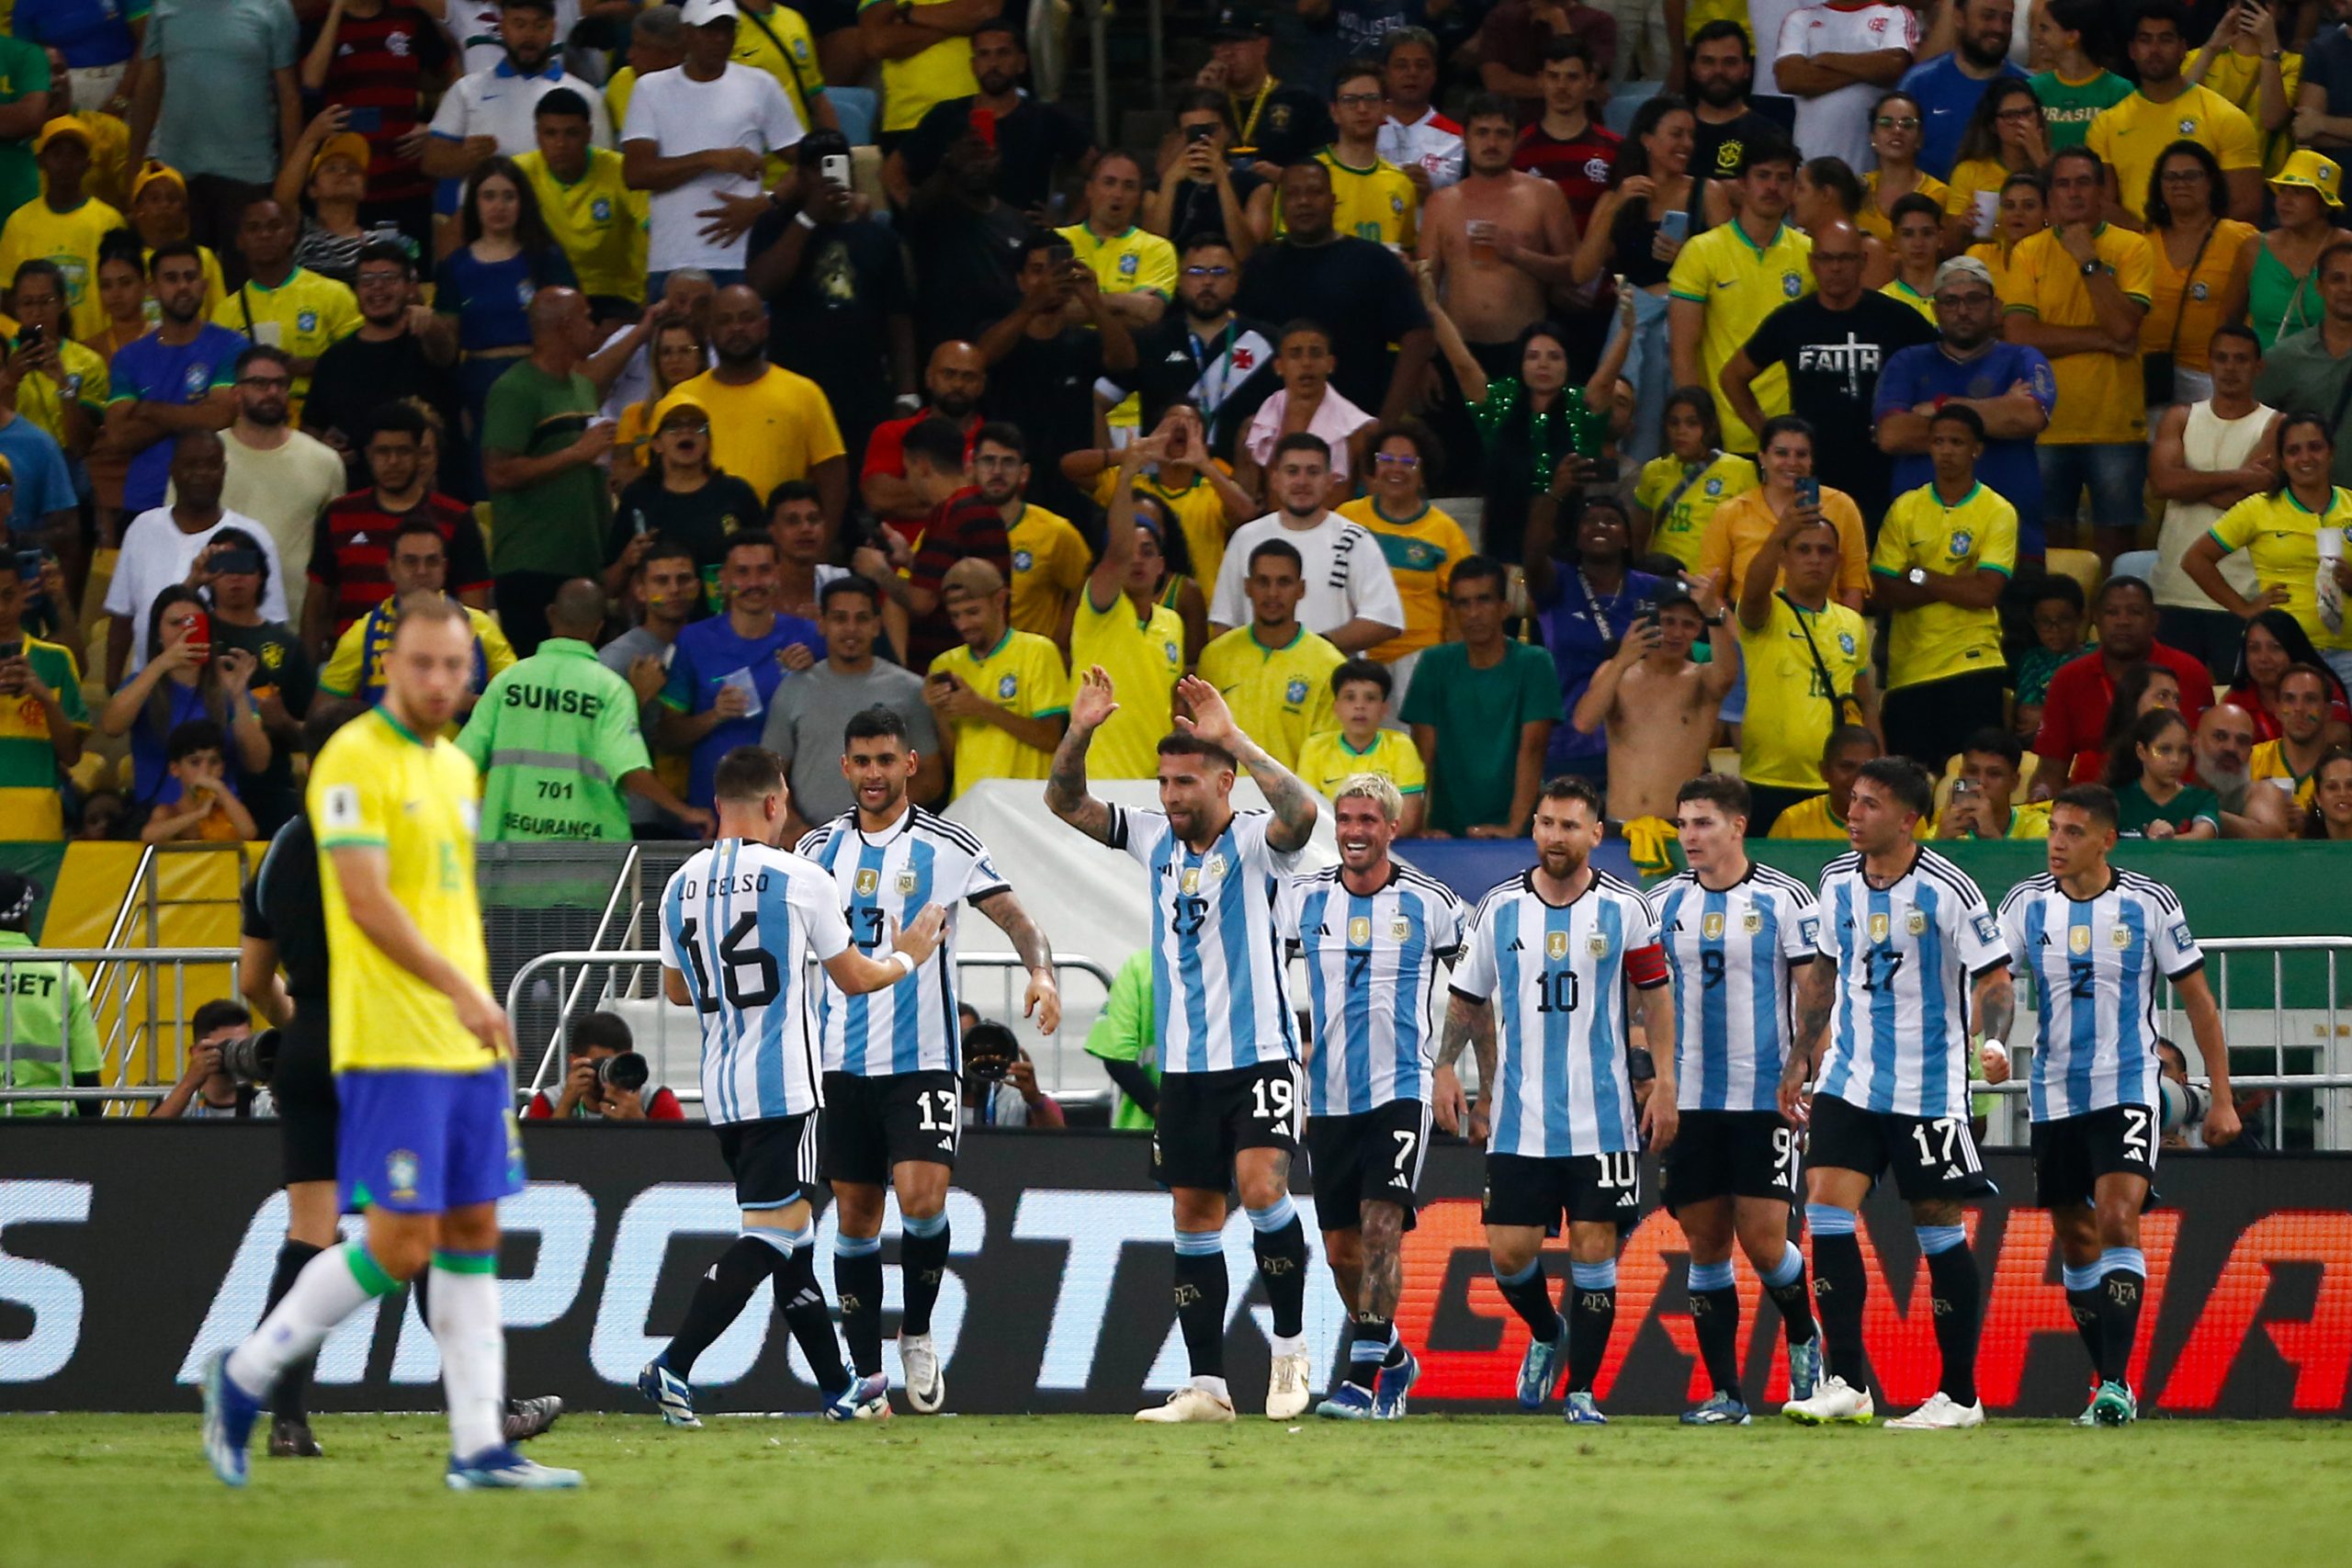 Argentina (Photo by Wagner Meier/Getty Images)